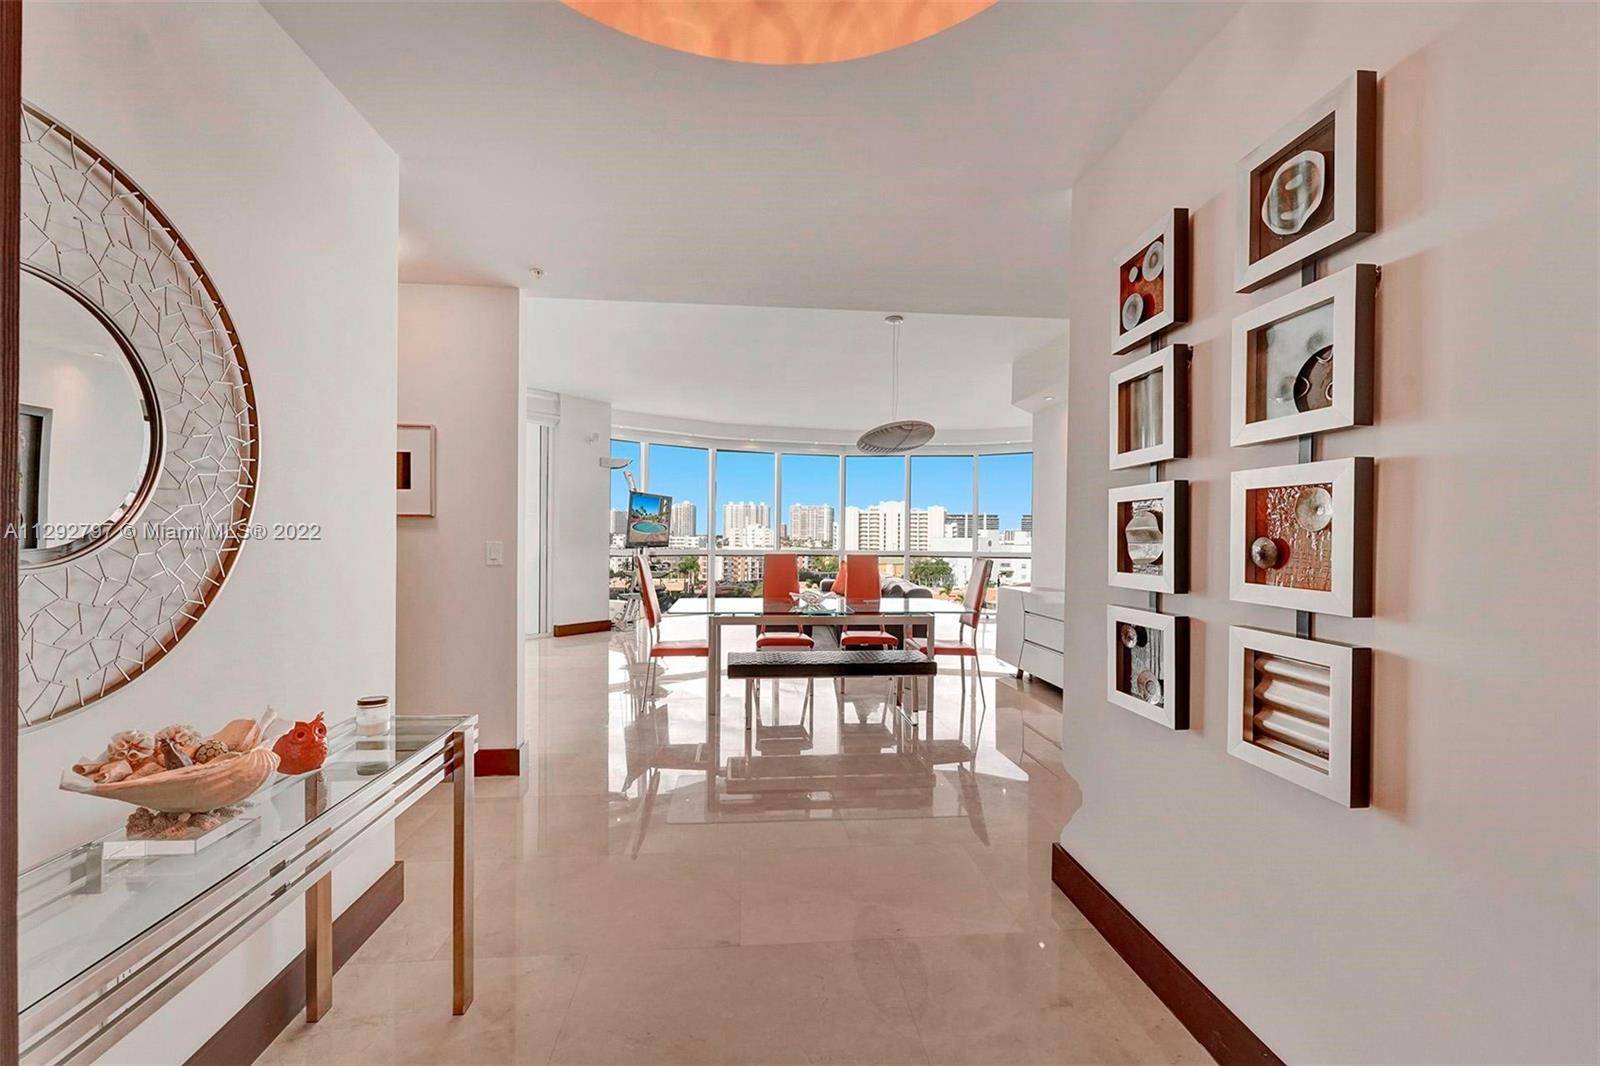 LUXURIOUS 3 BEDROOM 3. 5 BATHS PLUS DEN UNIT IN TRUMP PALACE WITH CITY OCEAN VIEWS.